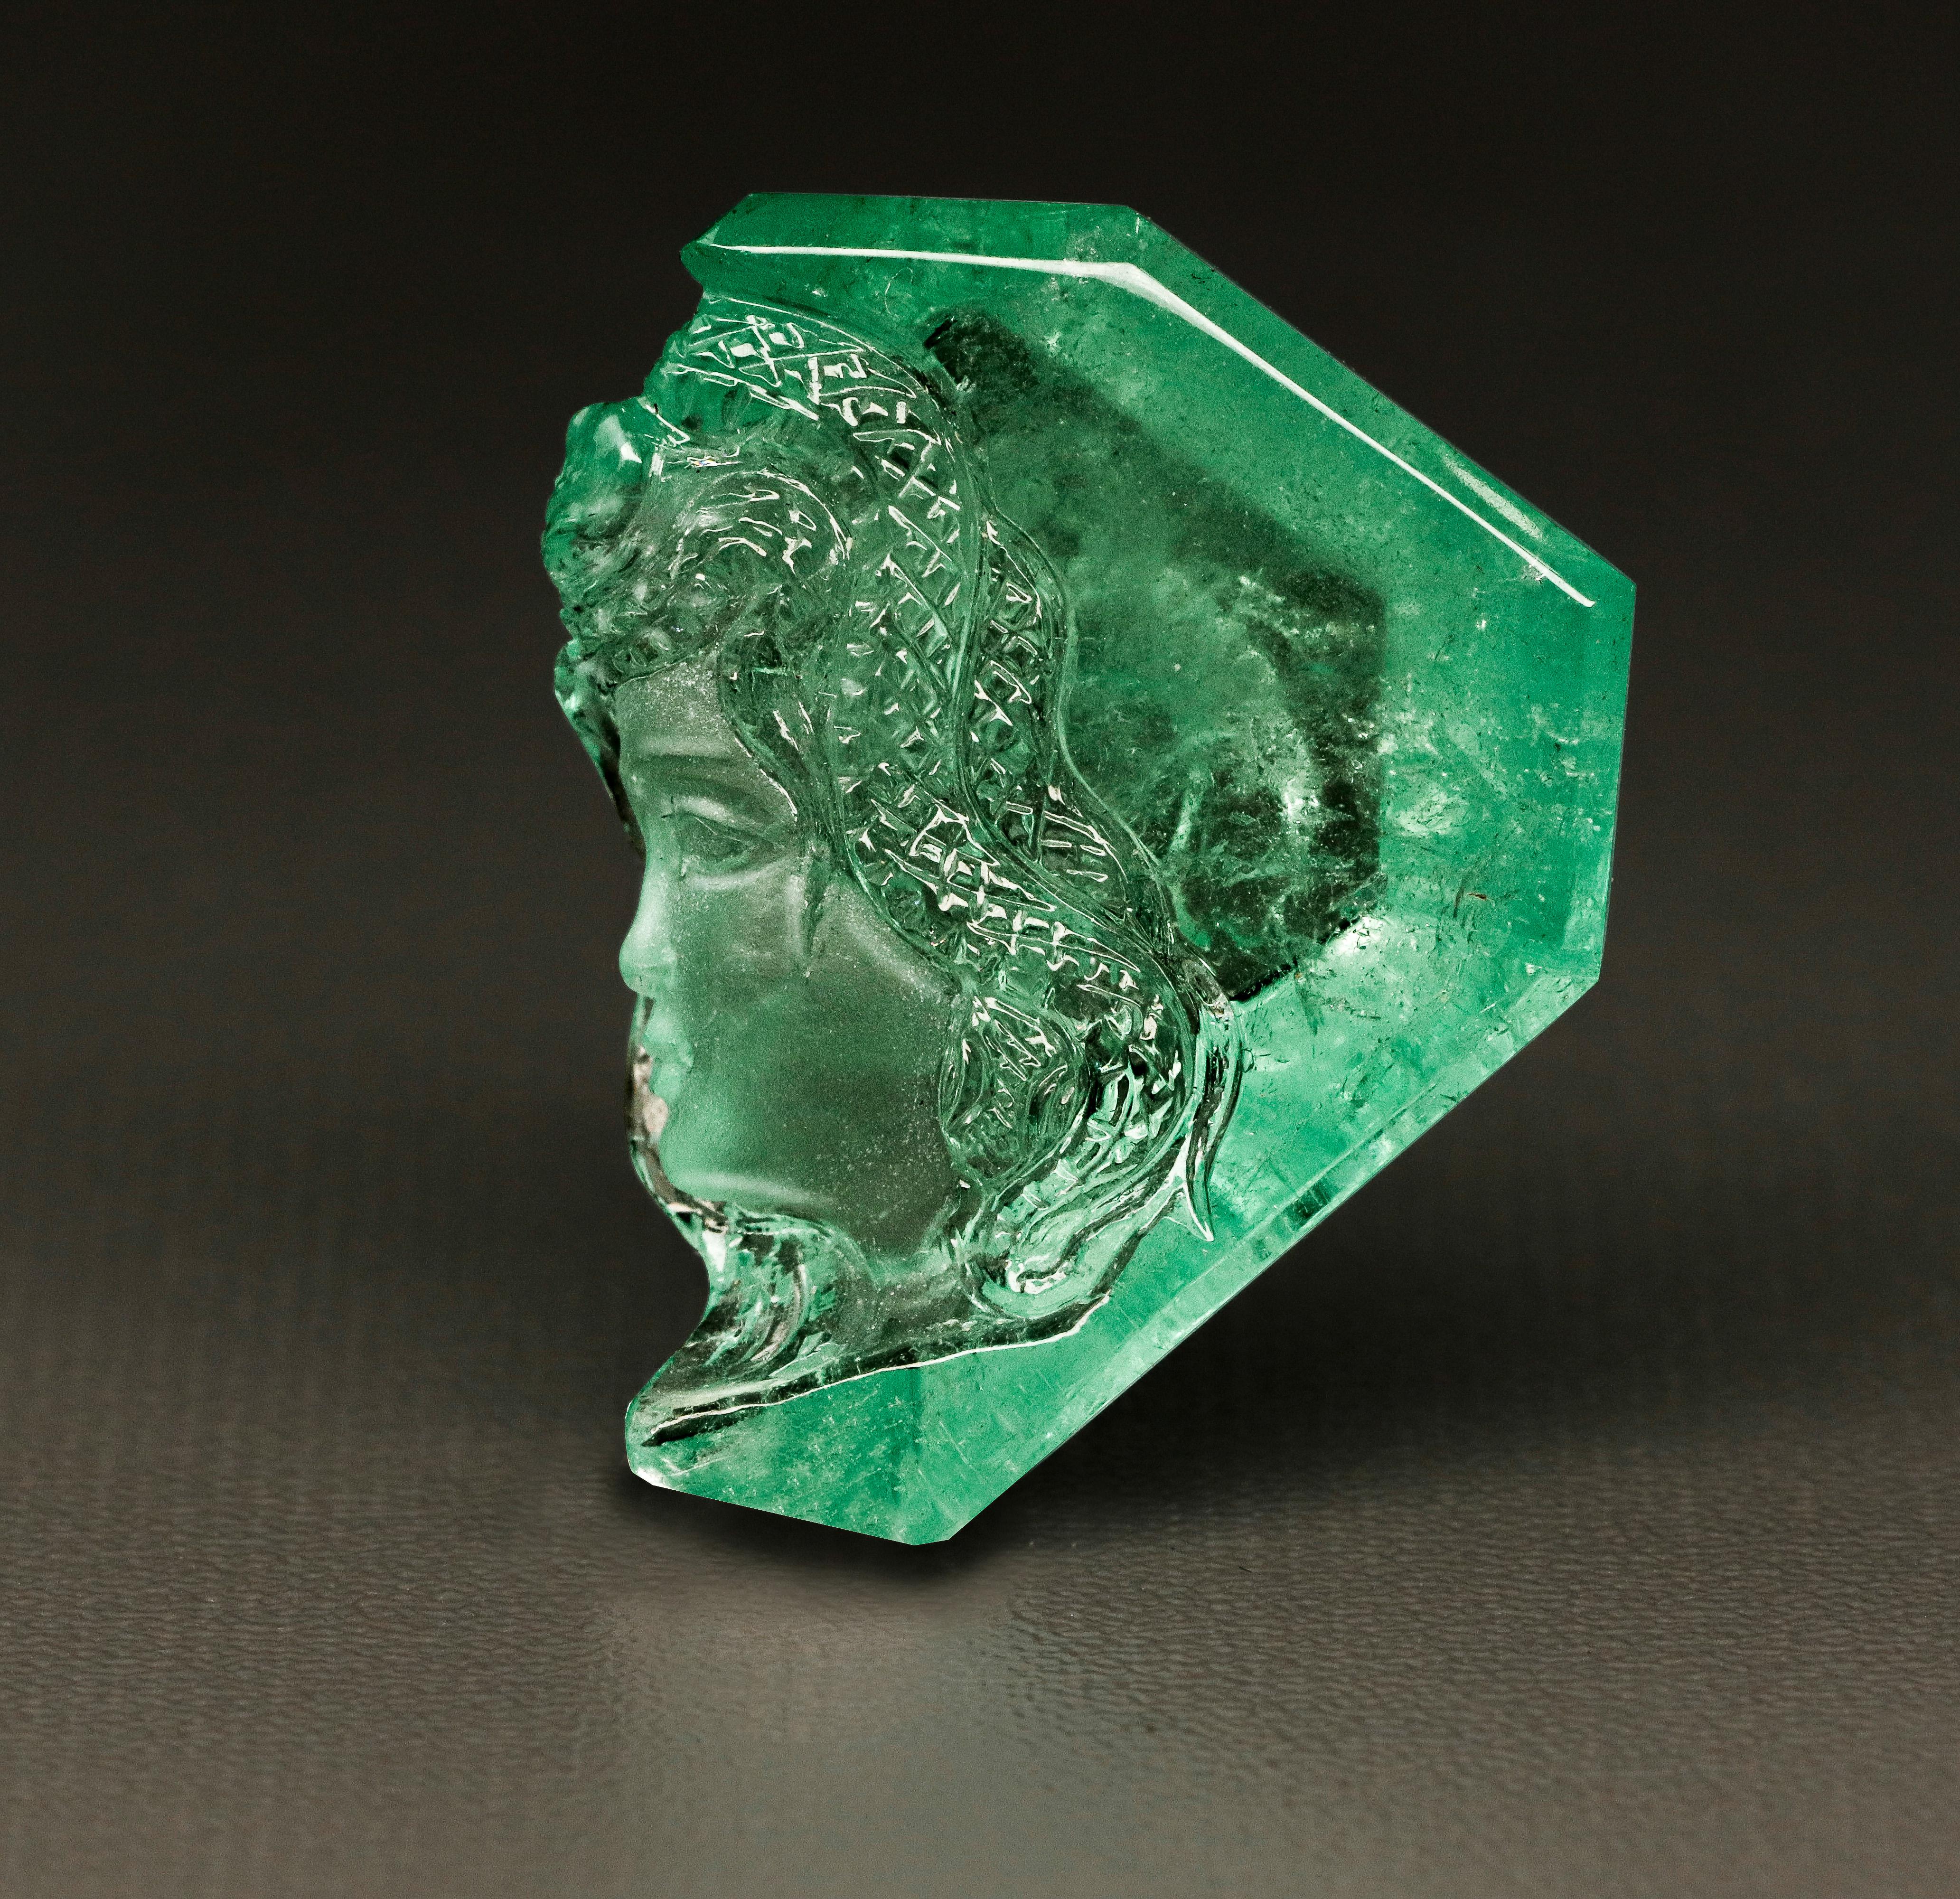 A figure of Medusa Gorgon seems to be frightening and dangerous, but if you remember her story, then Medusa was an innocently killed heroine who suffered because of her beauty

This No Oil Emerald carving shows both sides of Medusa’s soul -